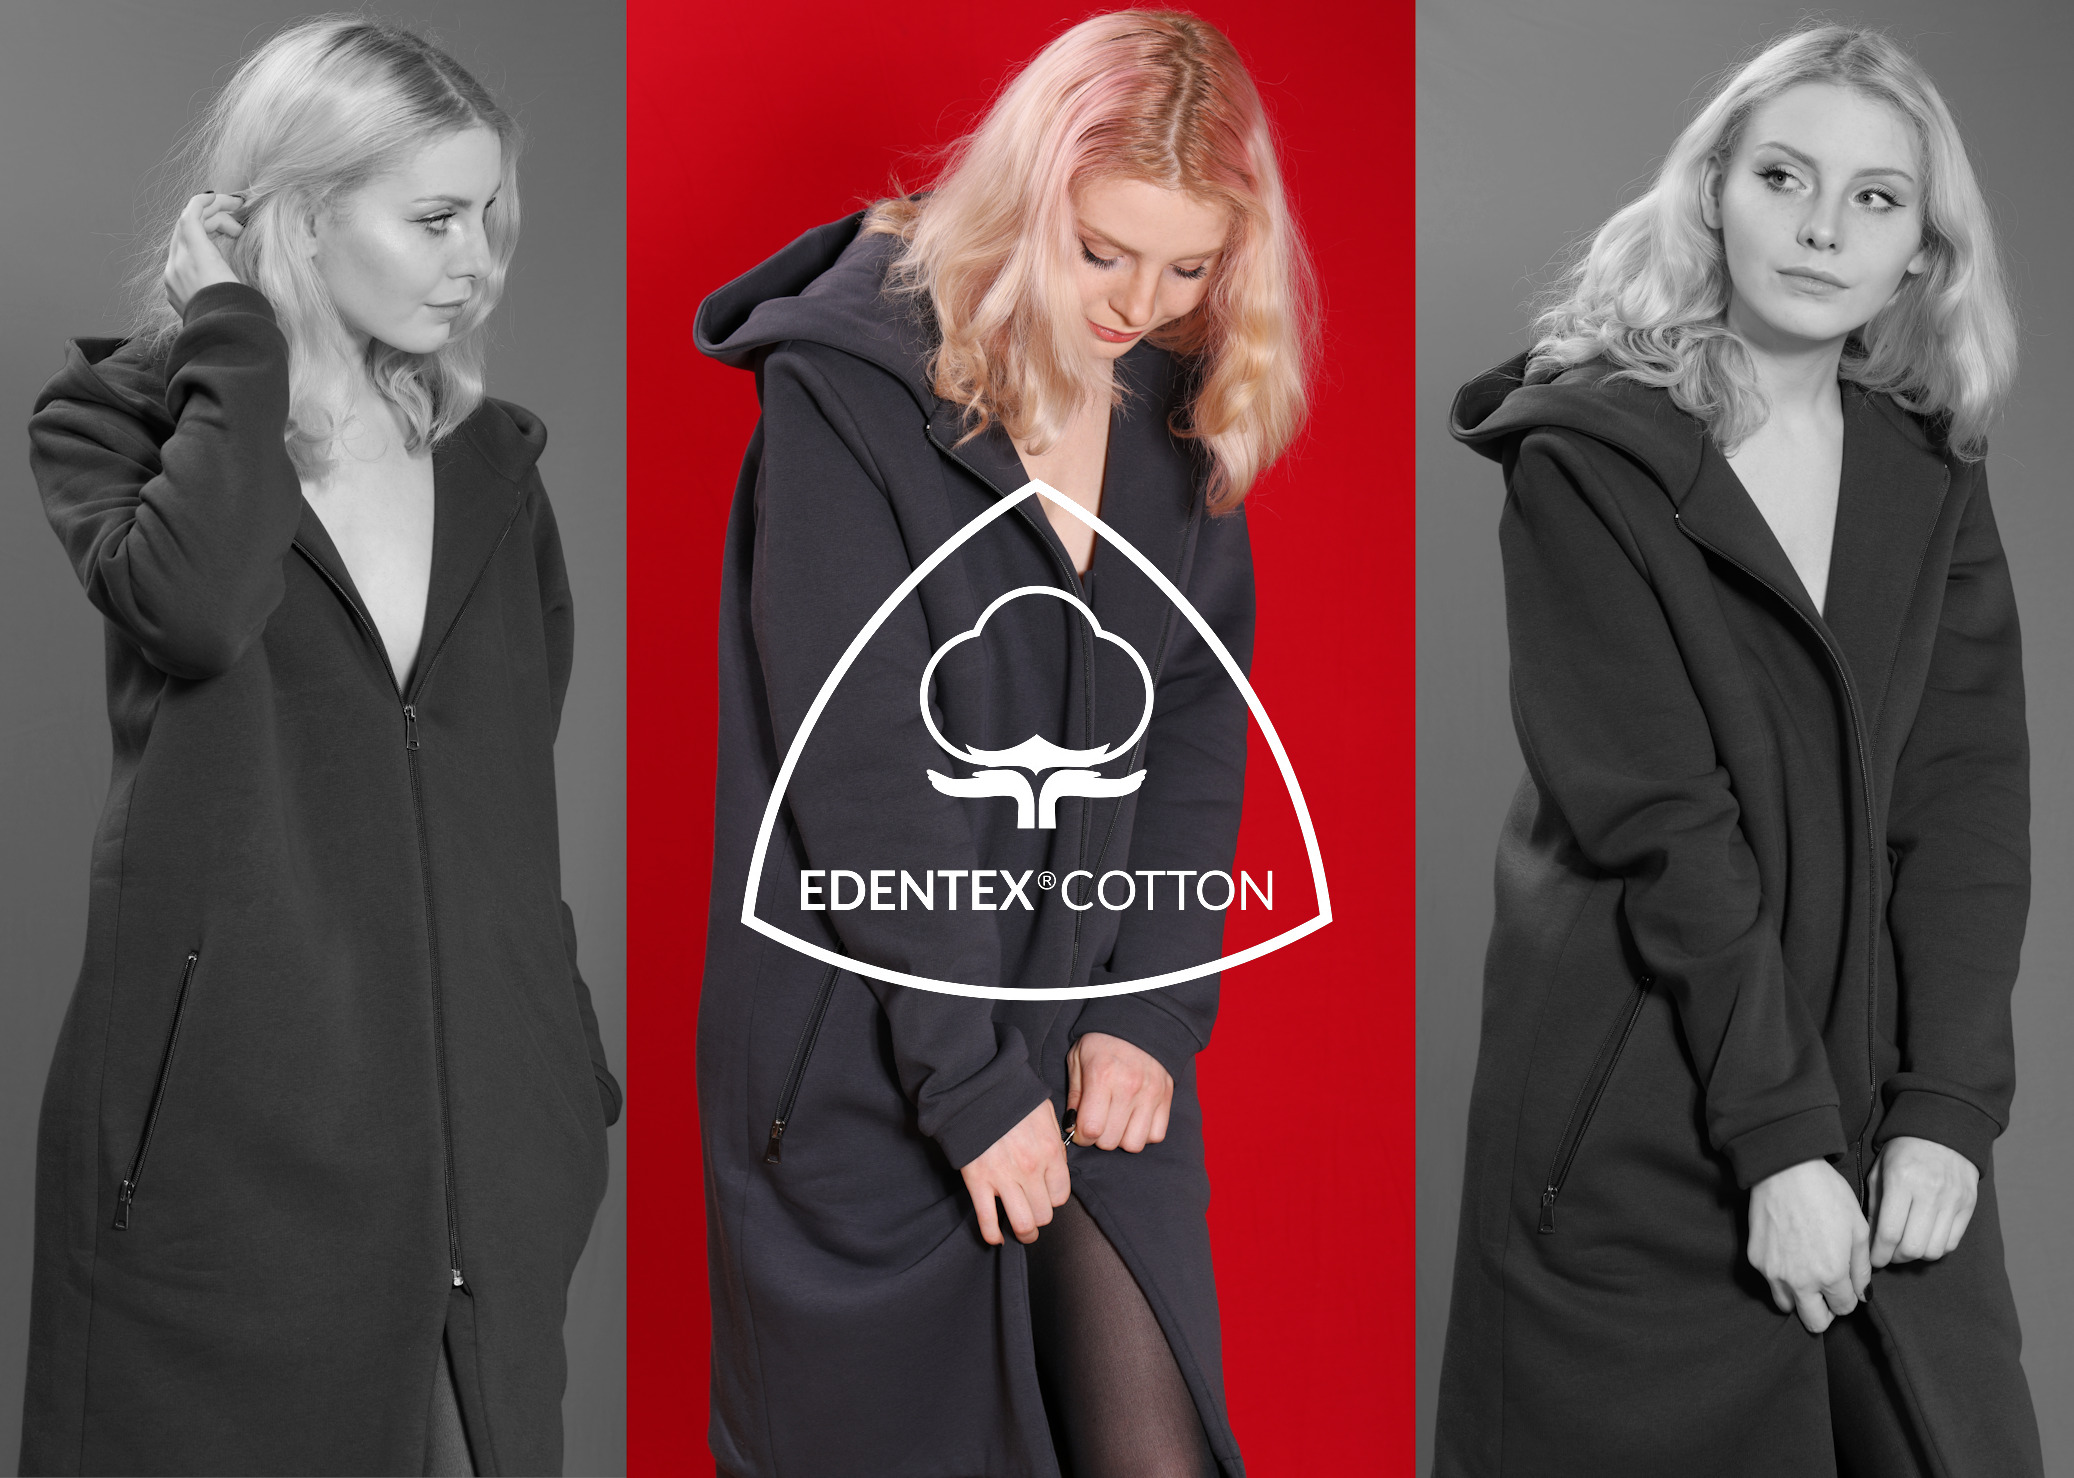 EDENTEX® is the value in every detail. Timeless beauty, love and elegance, softness and strength in one